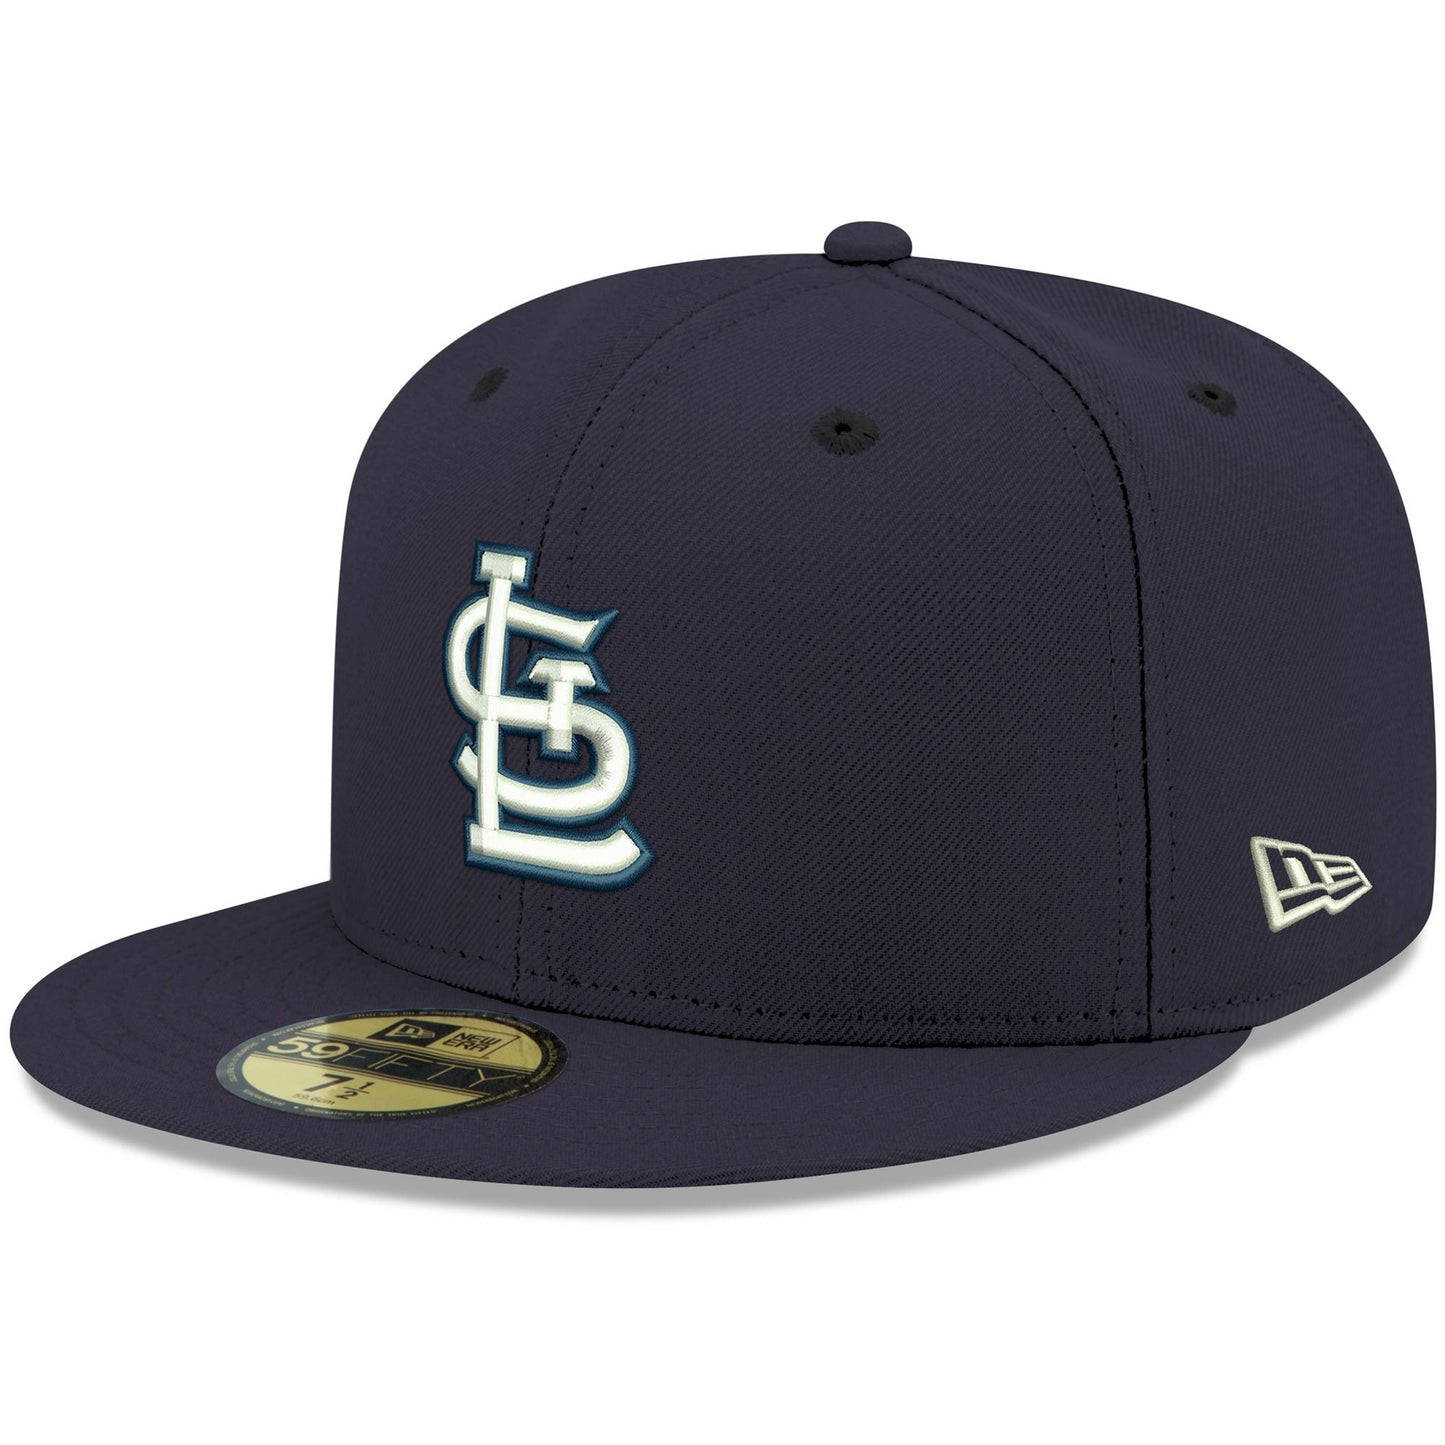 St. Louis Cardinals New Era White Logo 59FIFTY Fitted Hat - Navy